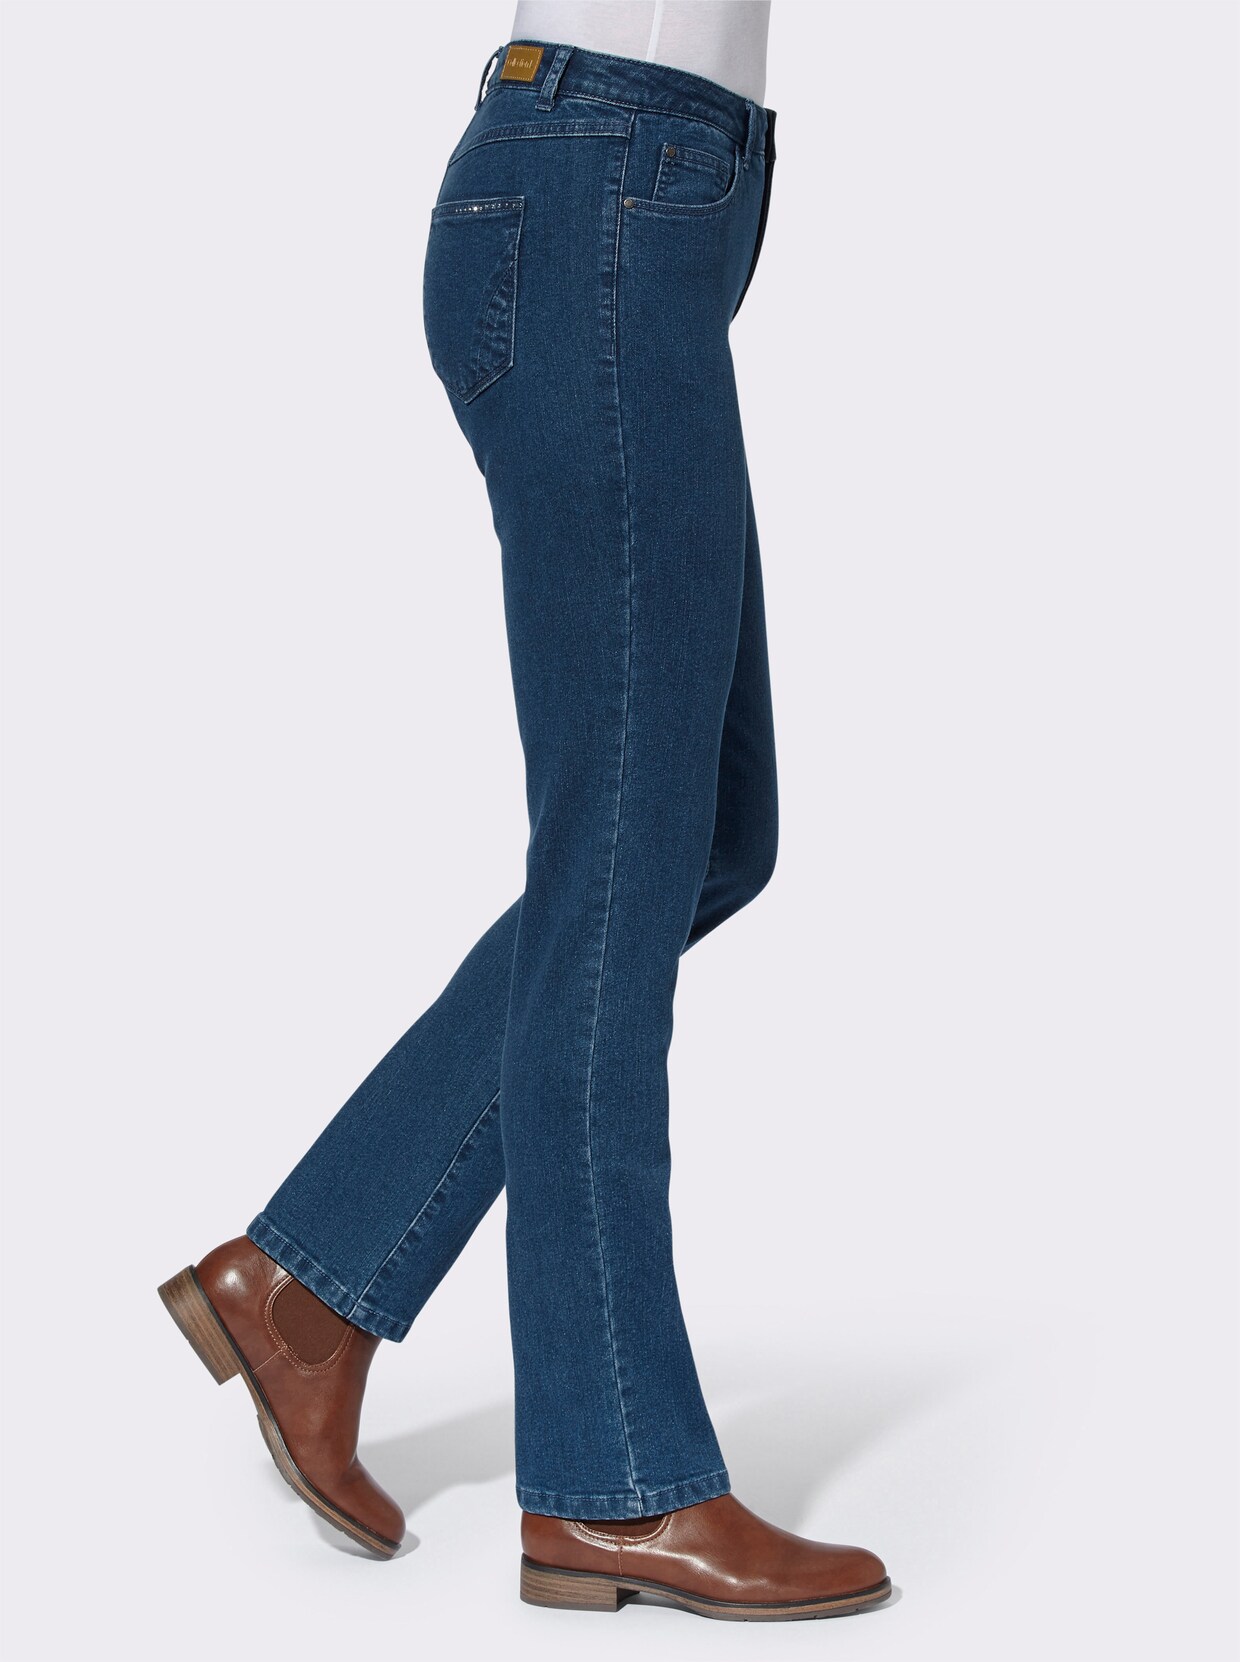 Thermojeans - blue-stone-washed